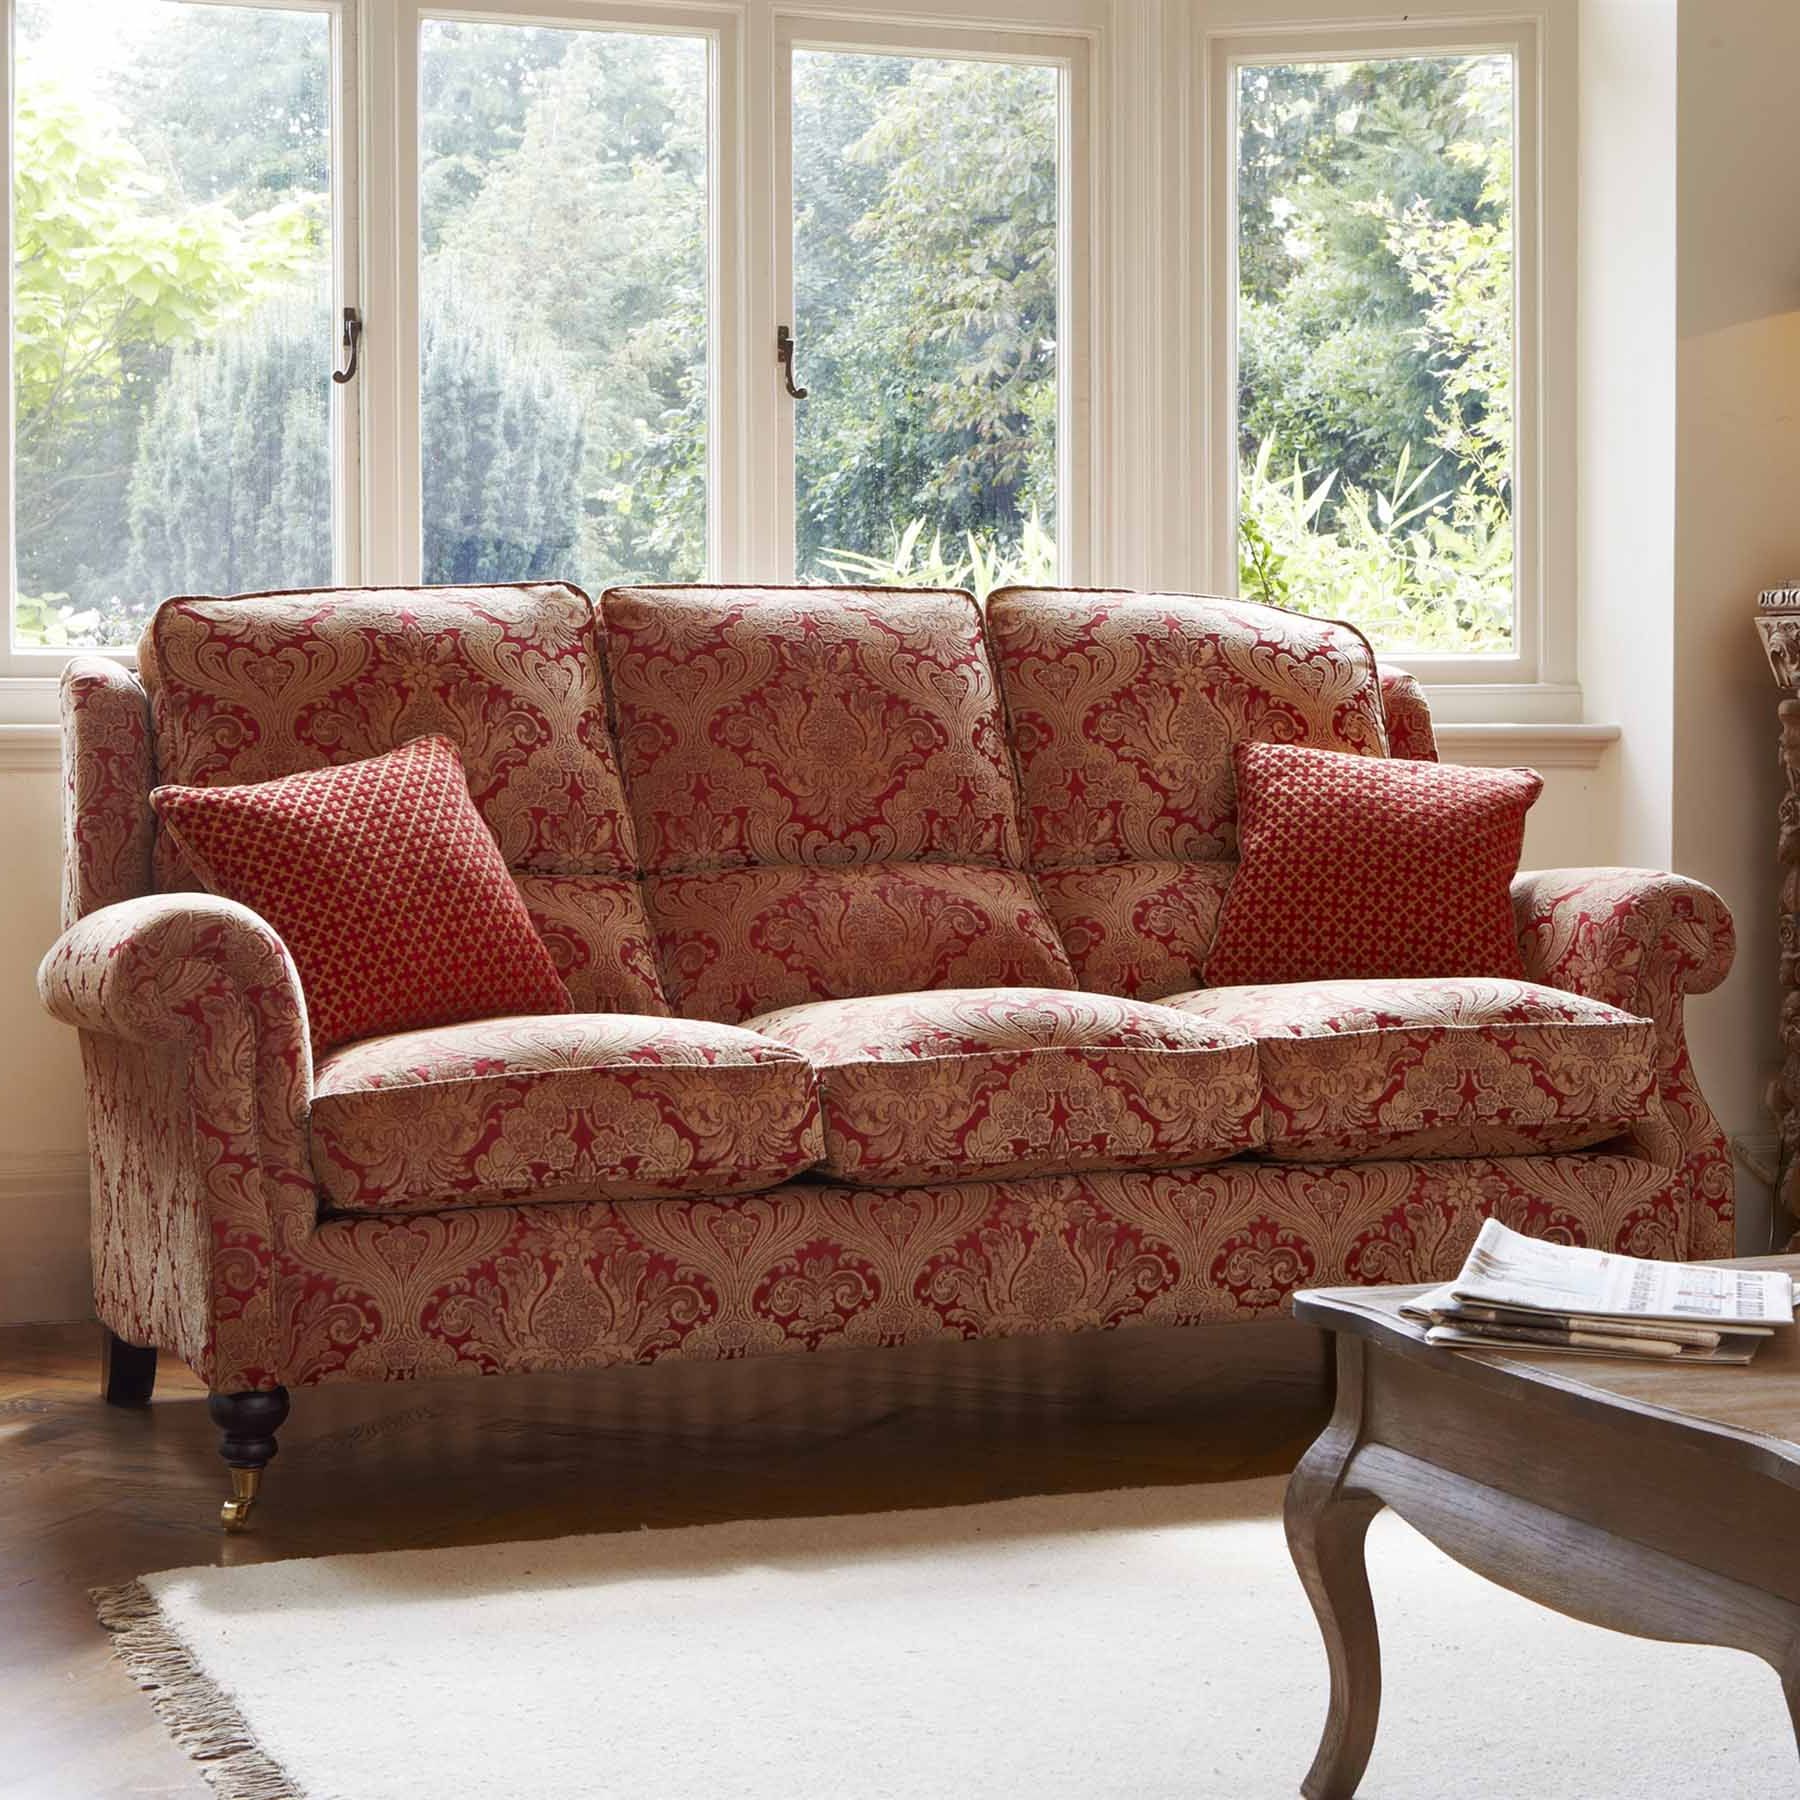 Parker Knoll Oakham 3 Seater Sofa – Tr Hayes Furniture Bath With Regard To Well Liked Traditional 3 Seater Sofas (View 6 of 15)